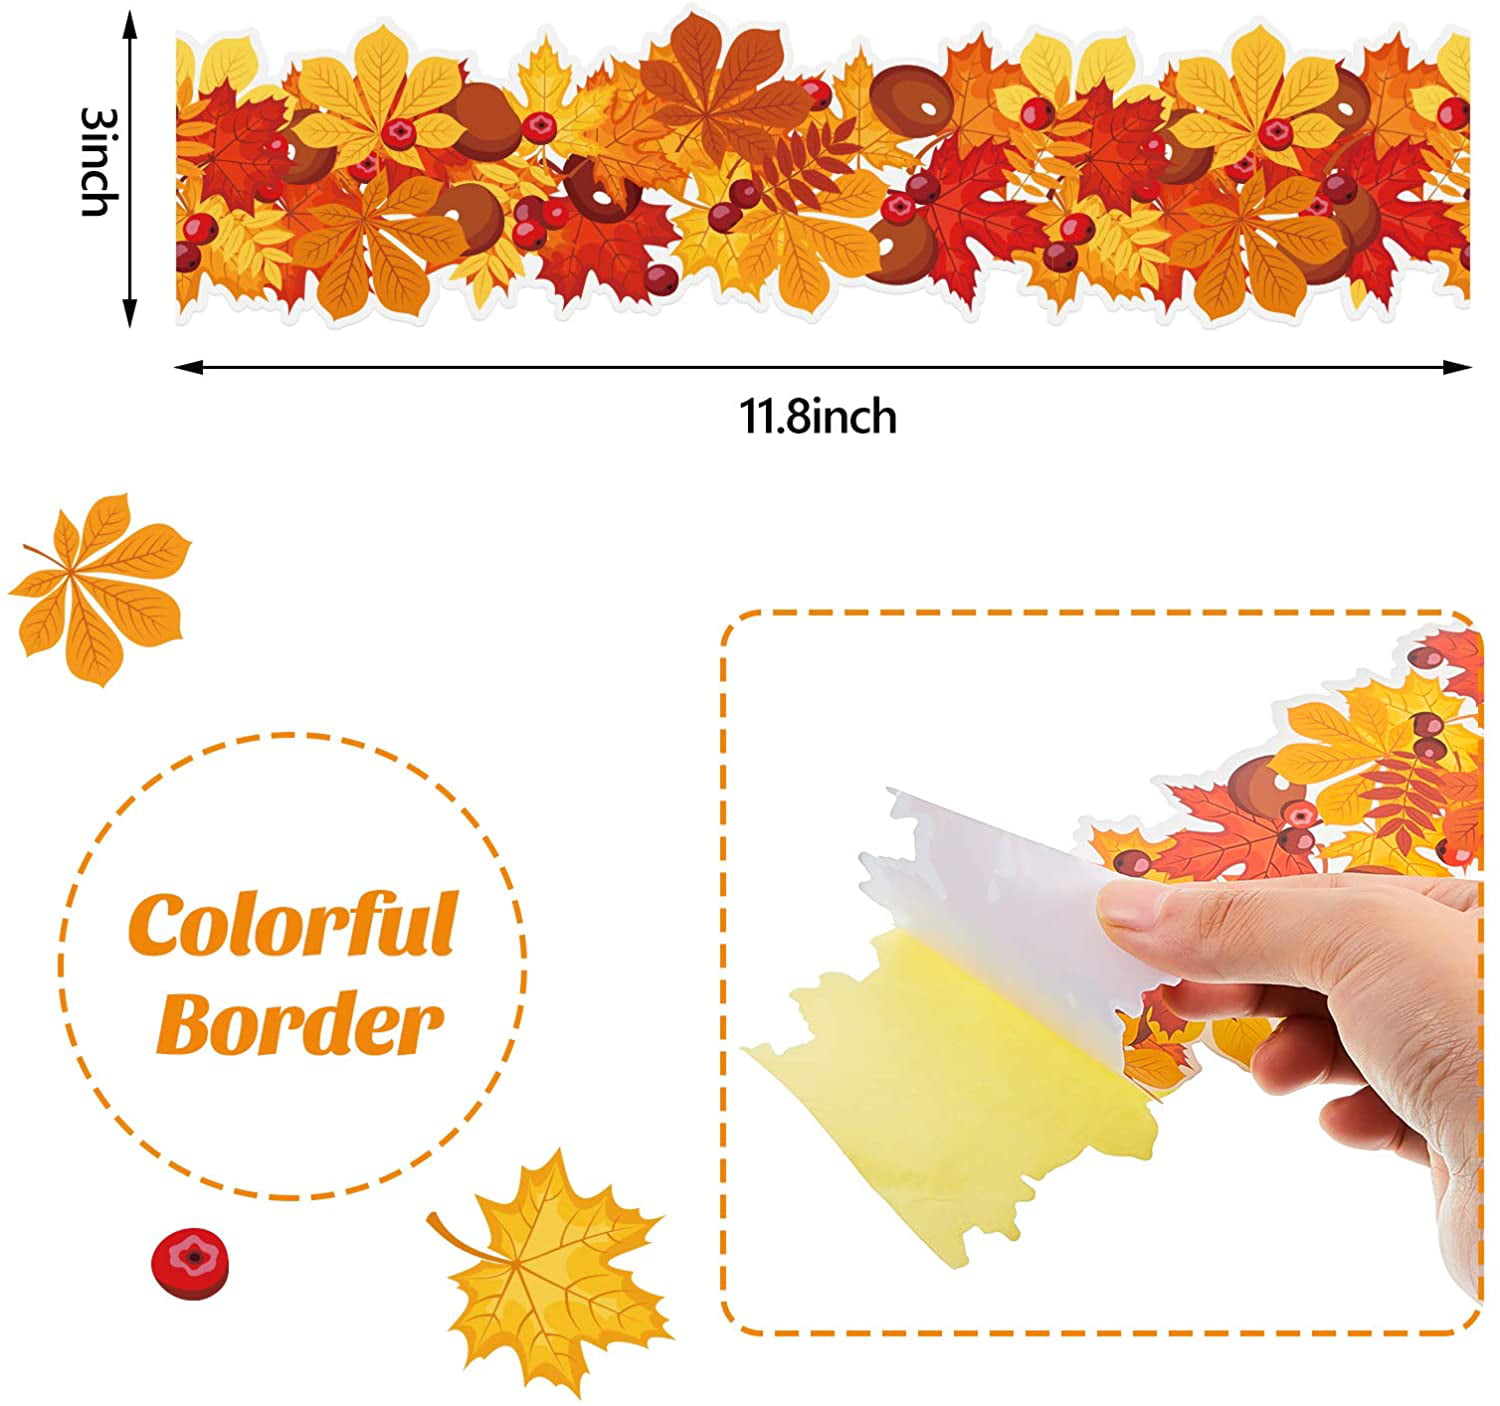 60 Pieces Pumpkins Borders Acorns Maple Leaf Borders Autumn Border Bulletin Board Borders Stickers Self-Adhesive Scalloped Borders for Classroom Birthday Baby Shower Thanksgiving Party Decorations 